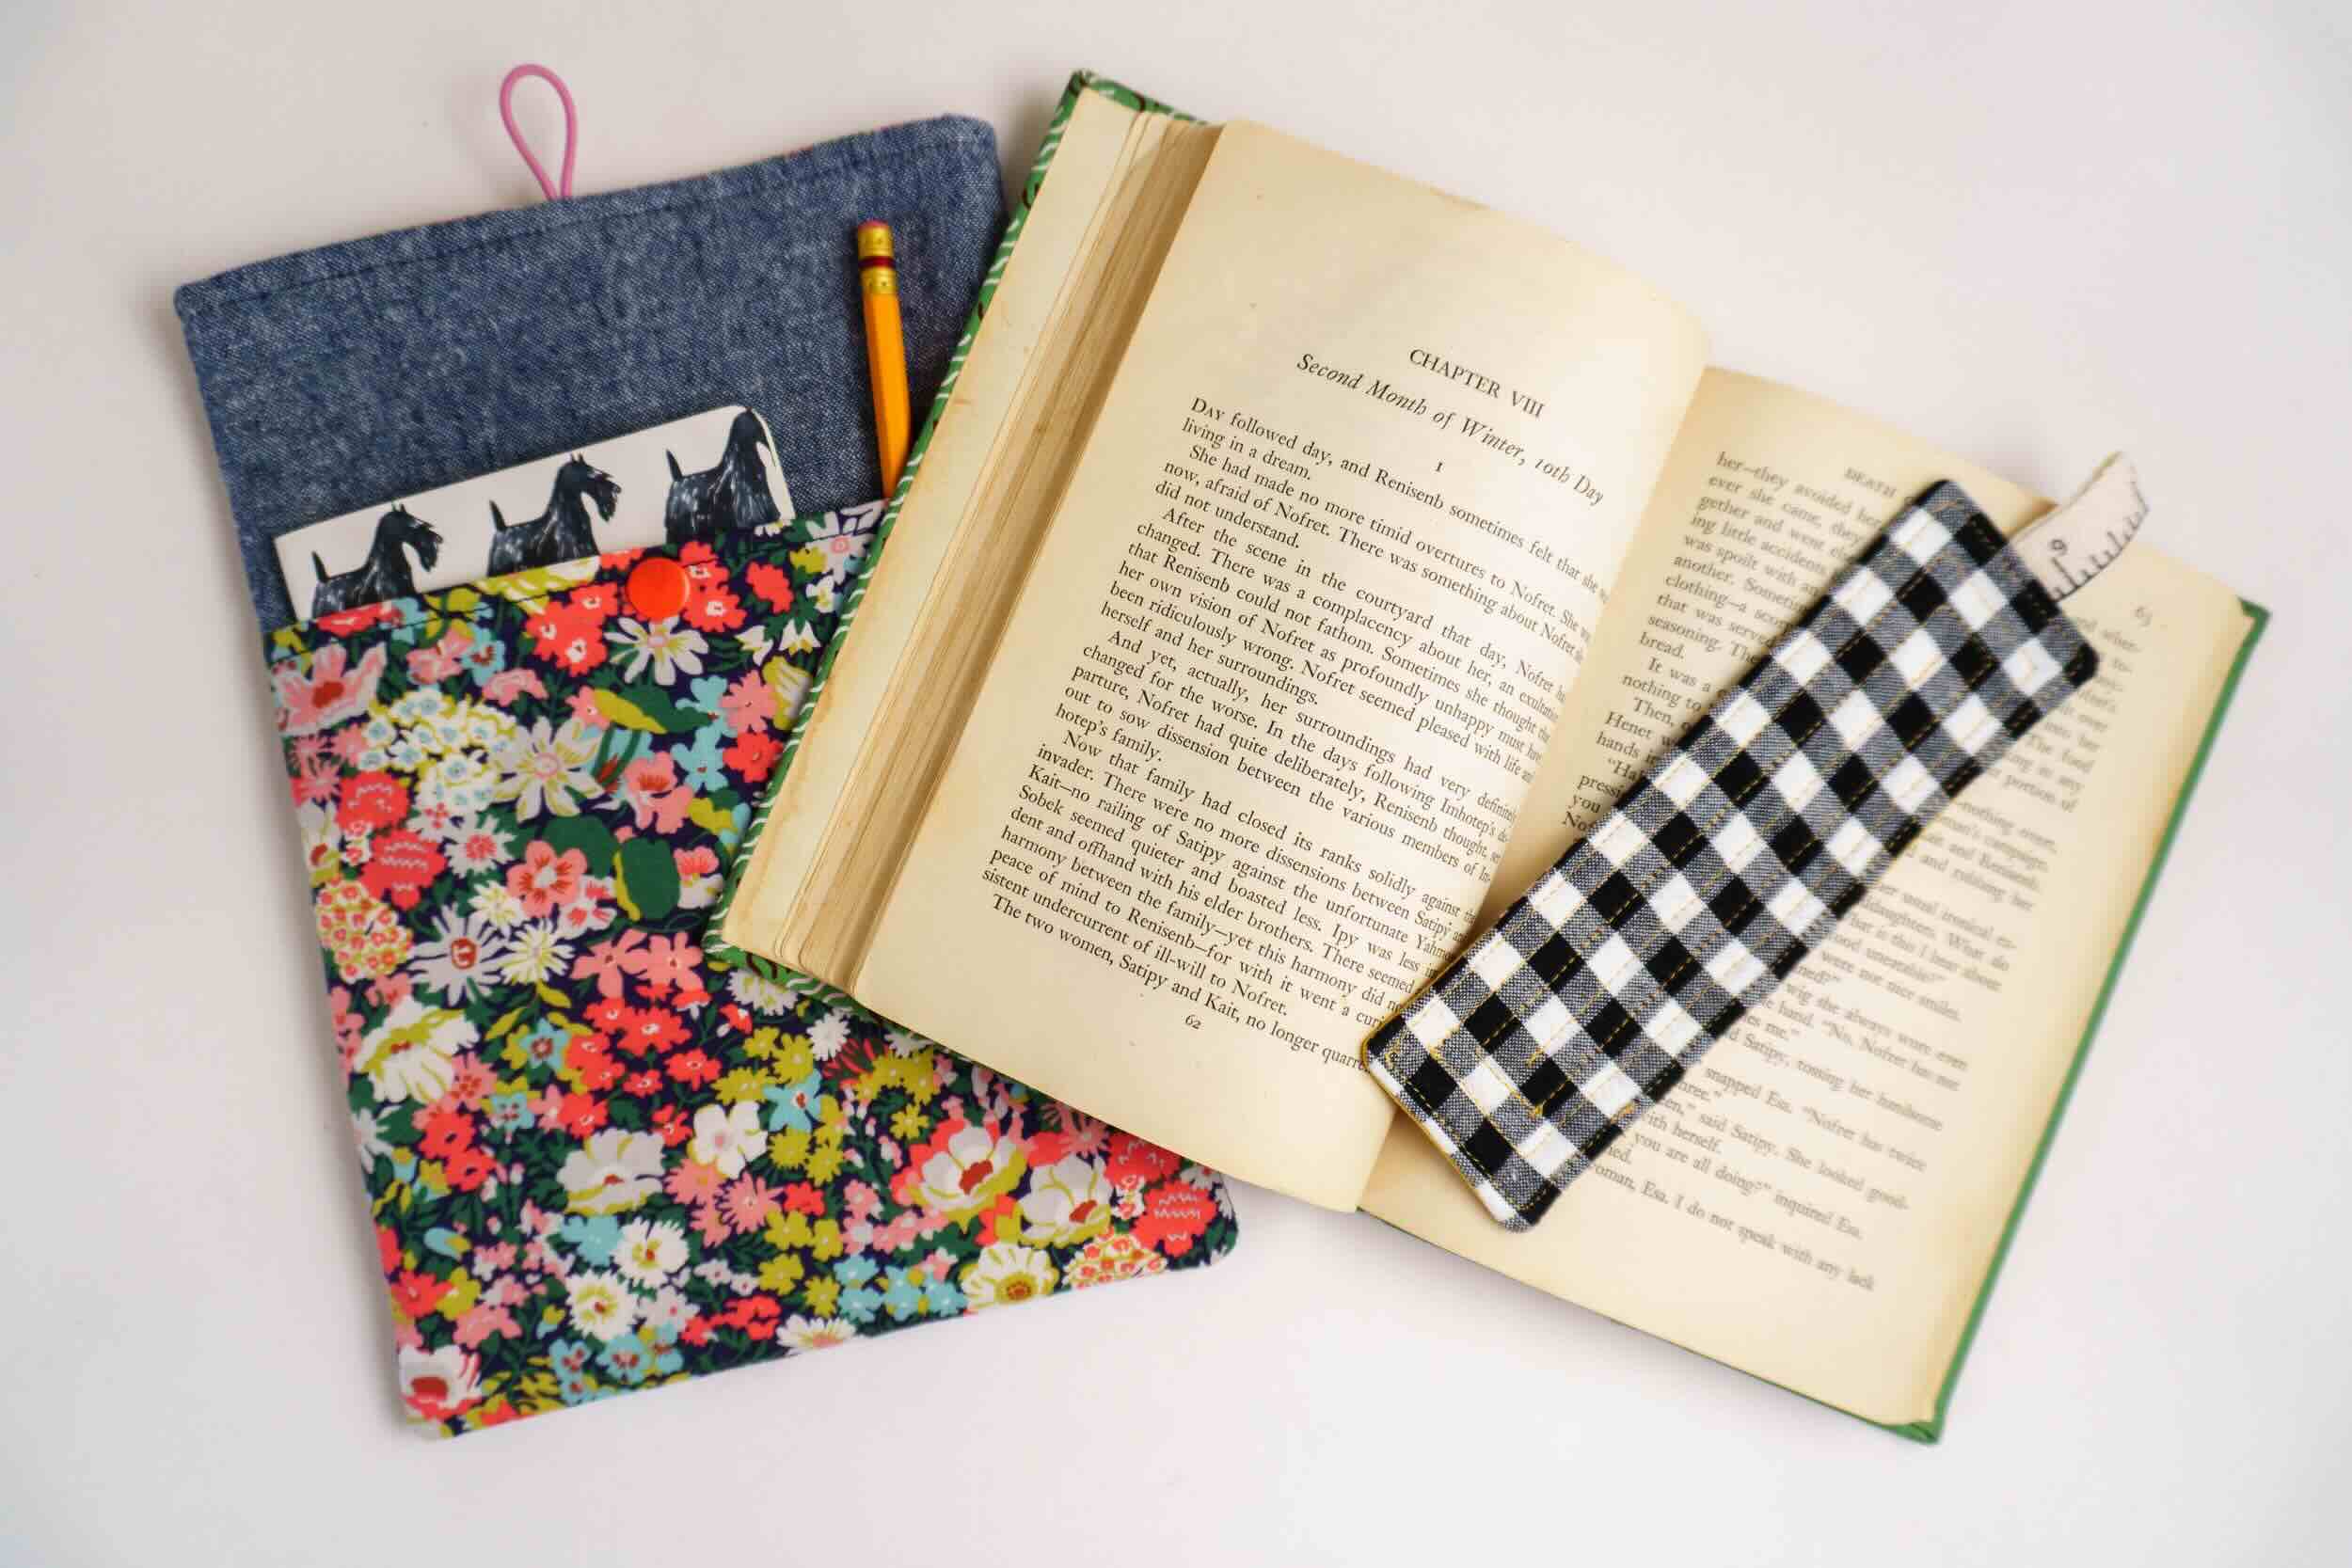 Crafty Renovations: DIY Book Cover And Bookmark Projects For Home Improvement